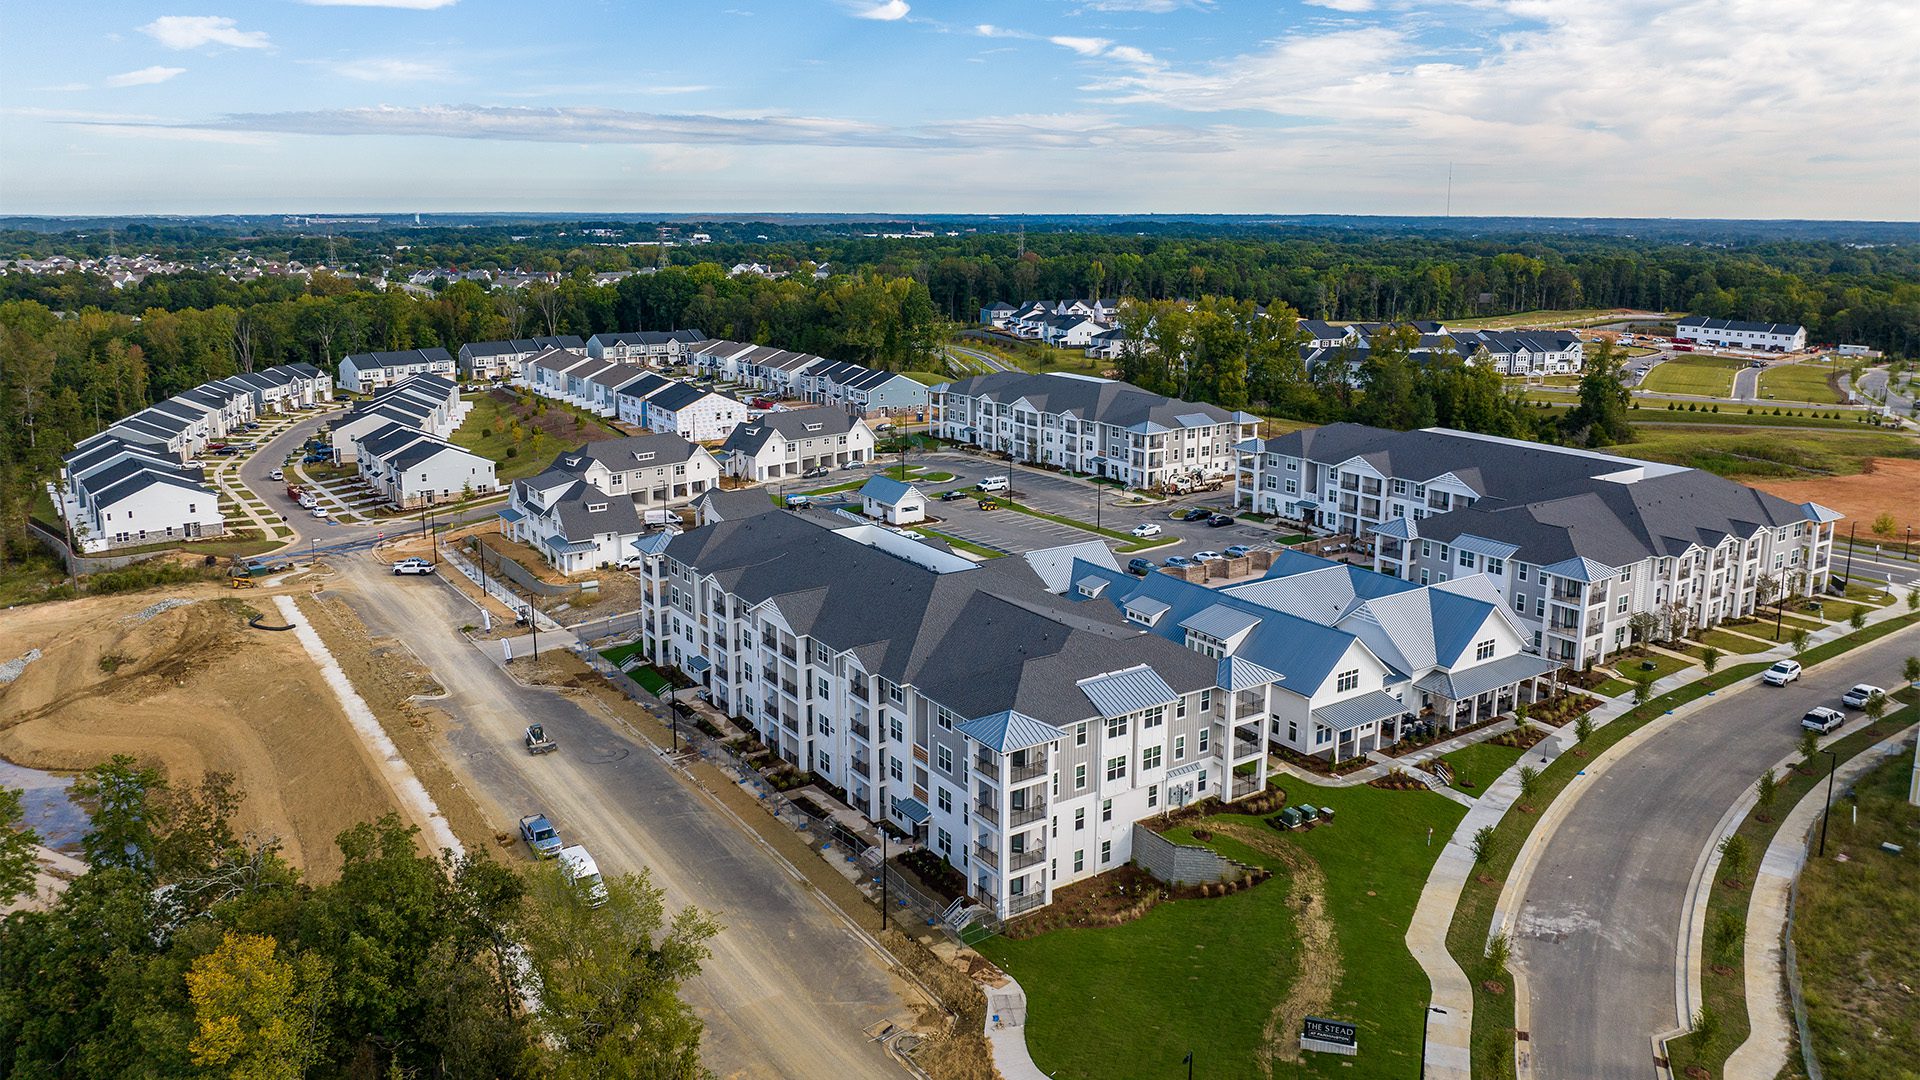 The Stead by Woodfield aerial image of apartment buildings